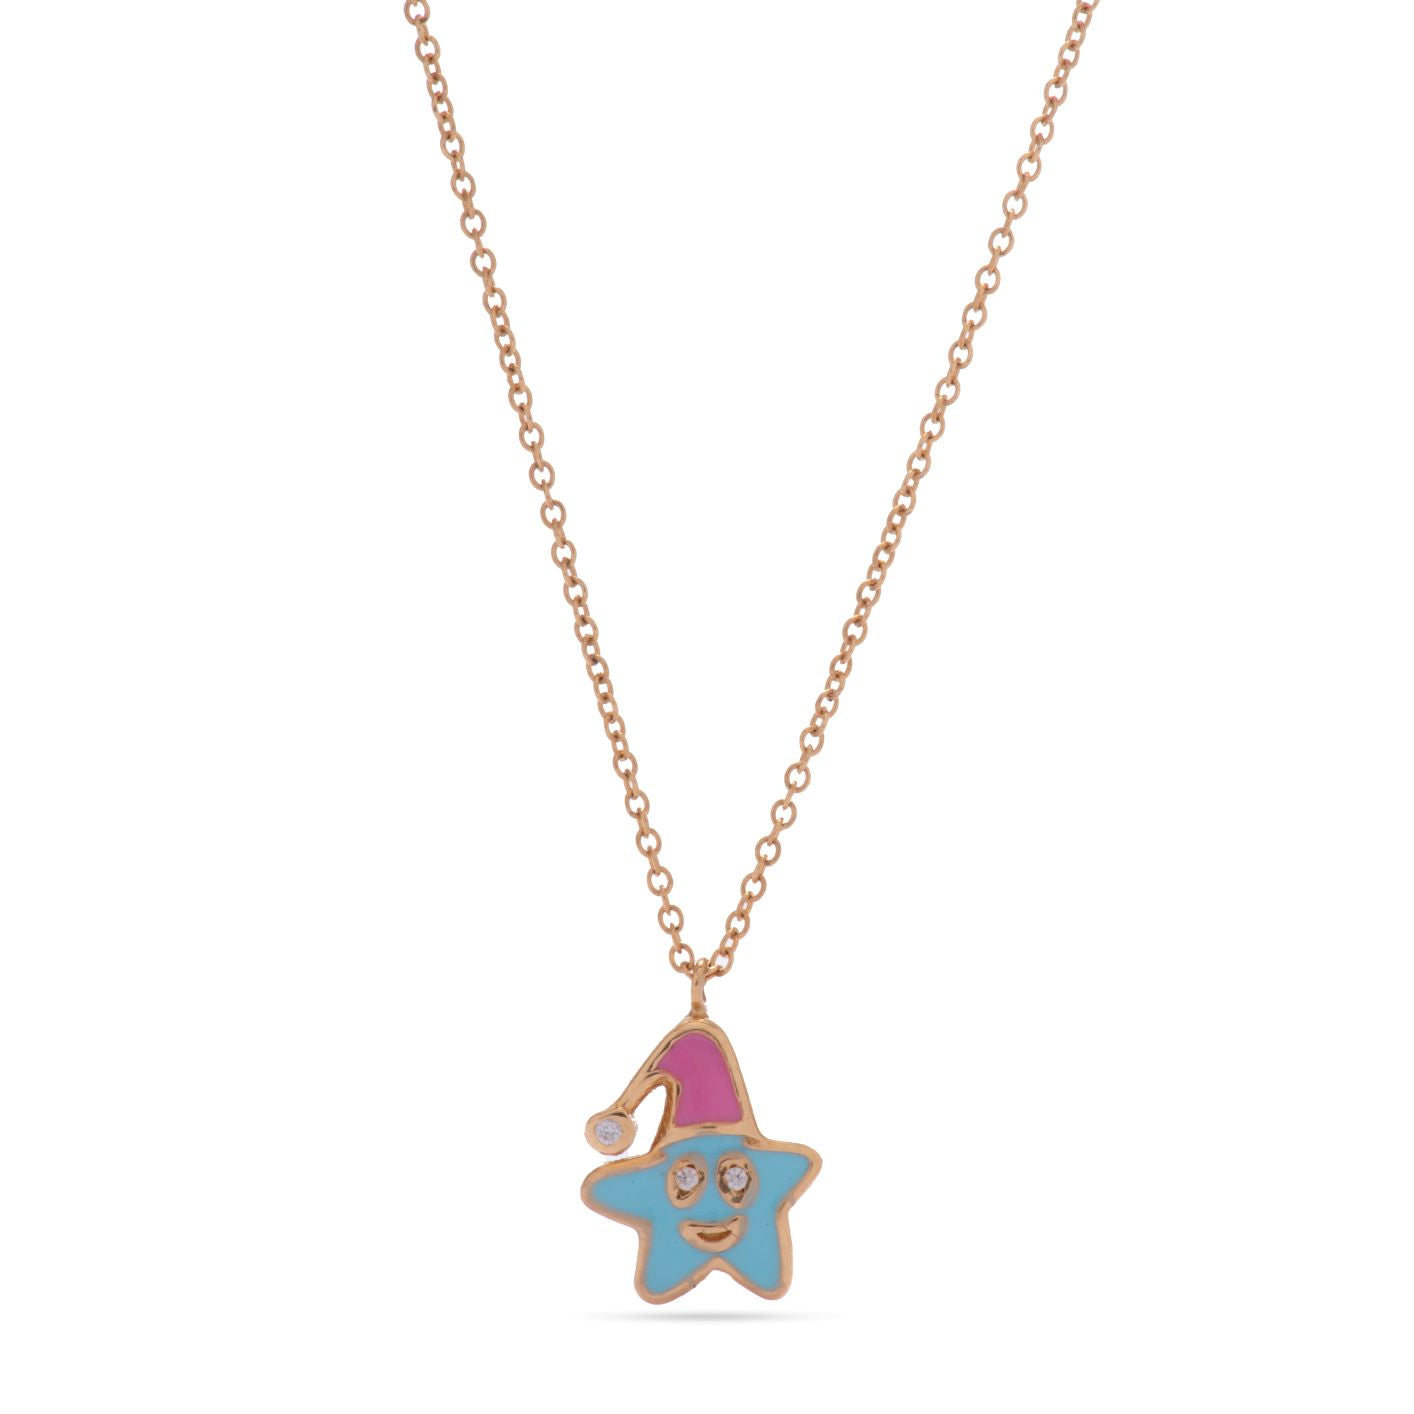 Kid's Delightful Star Shaped  Necklace in Yellow 18 K Gold - NB0537